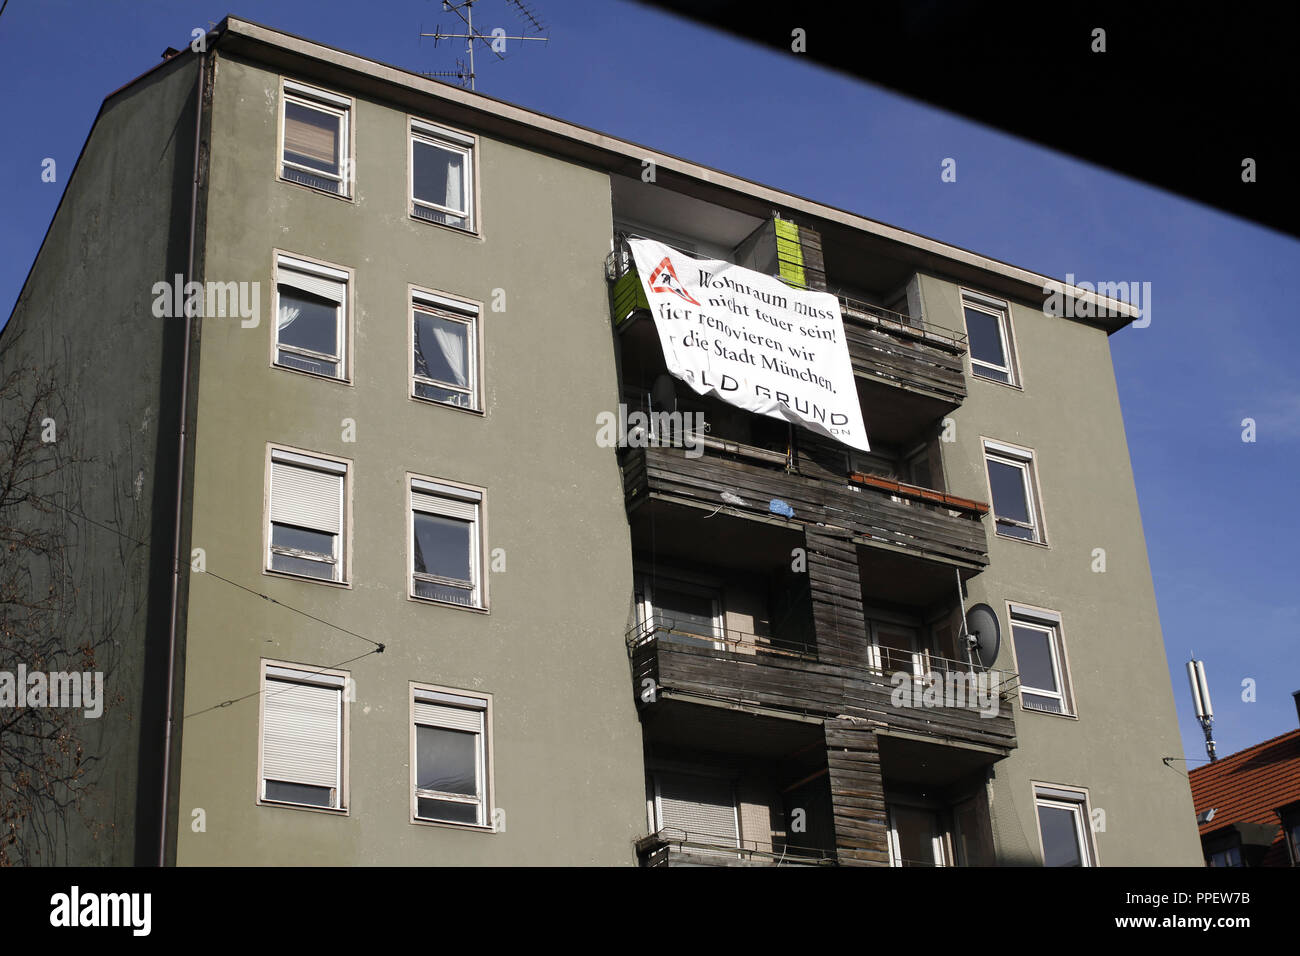 The movement 'Goldgrund' had inexpensively renovated an apartment in the municipal building at Muellerstrasse 6 within a week, under the motto 'Preserve instead of tearing down!' in order to demonstrate against the planned demolition of the property from the 50s. Stock Photo